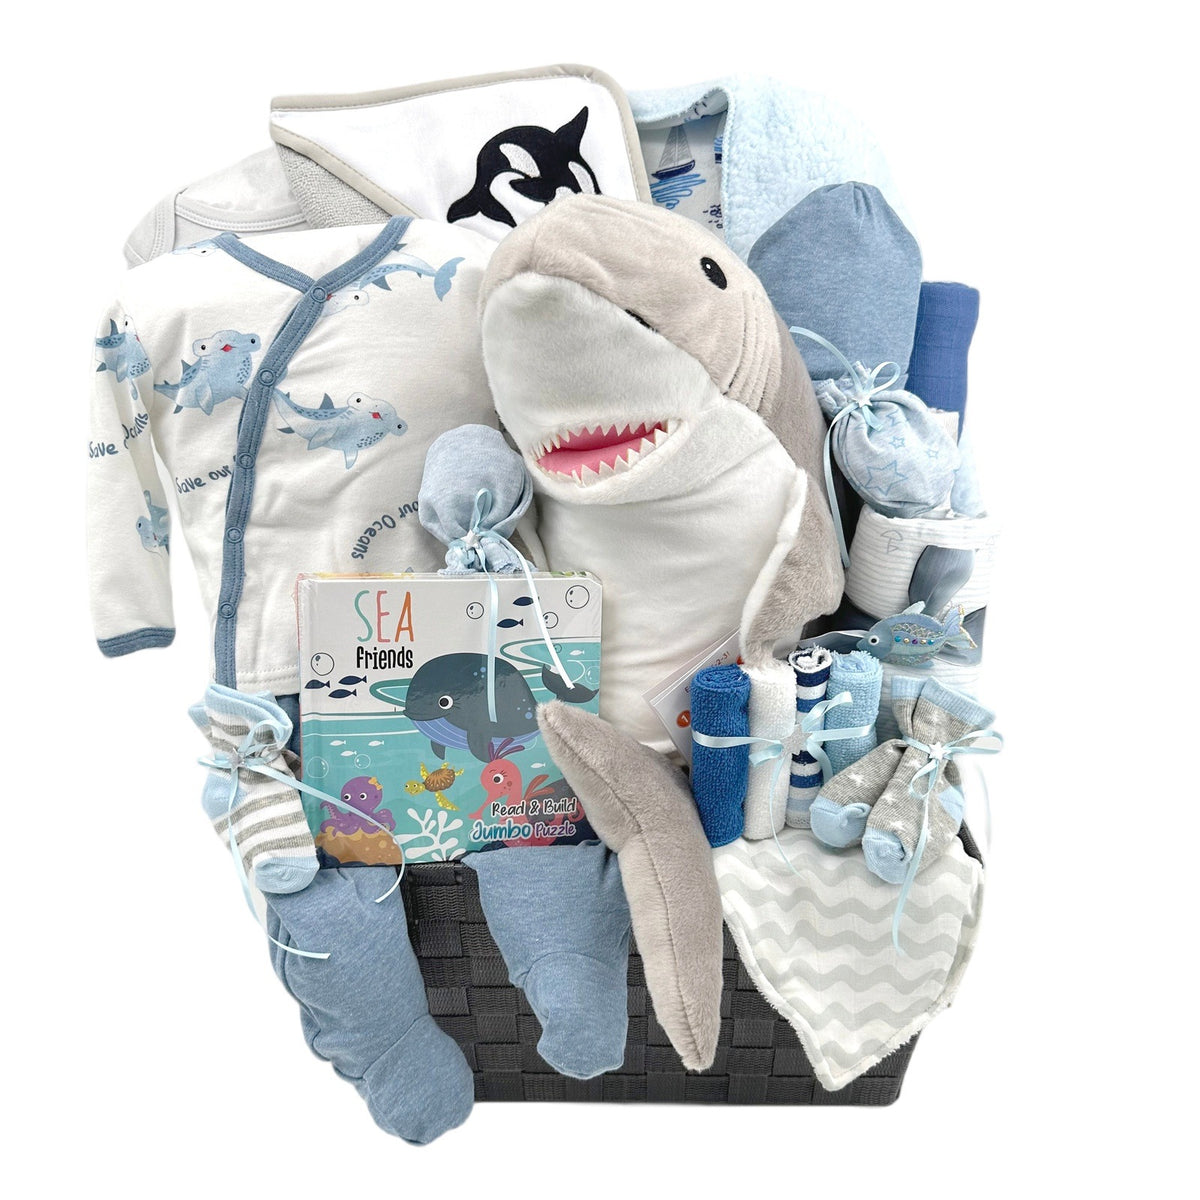 AquaMajesty: The Shark & Whale Collection